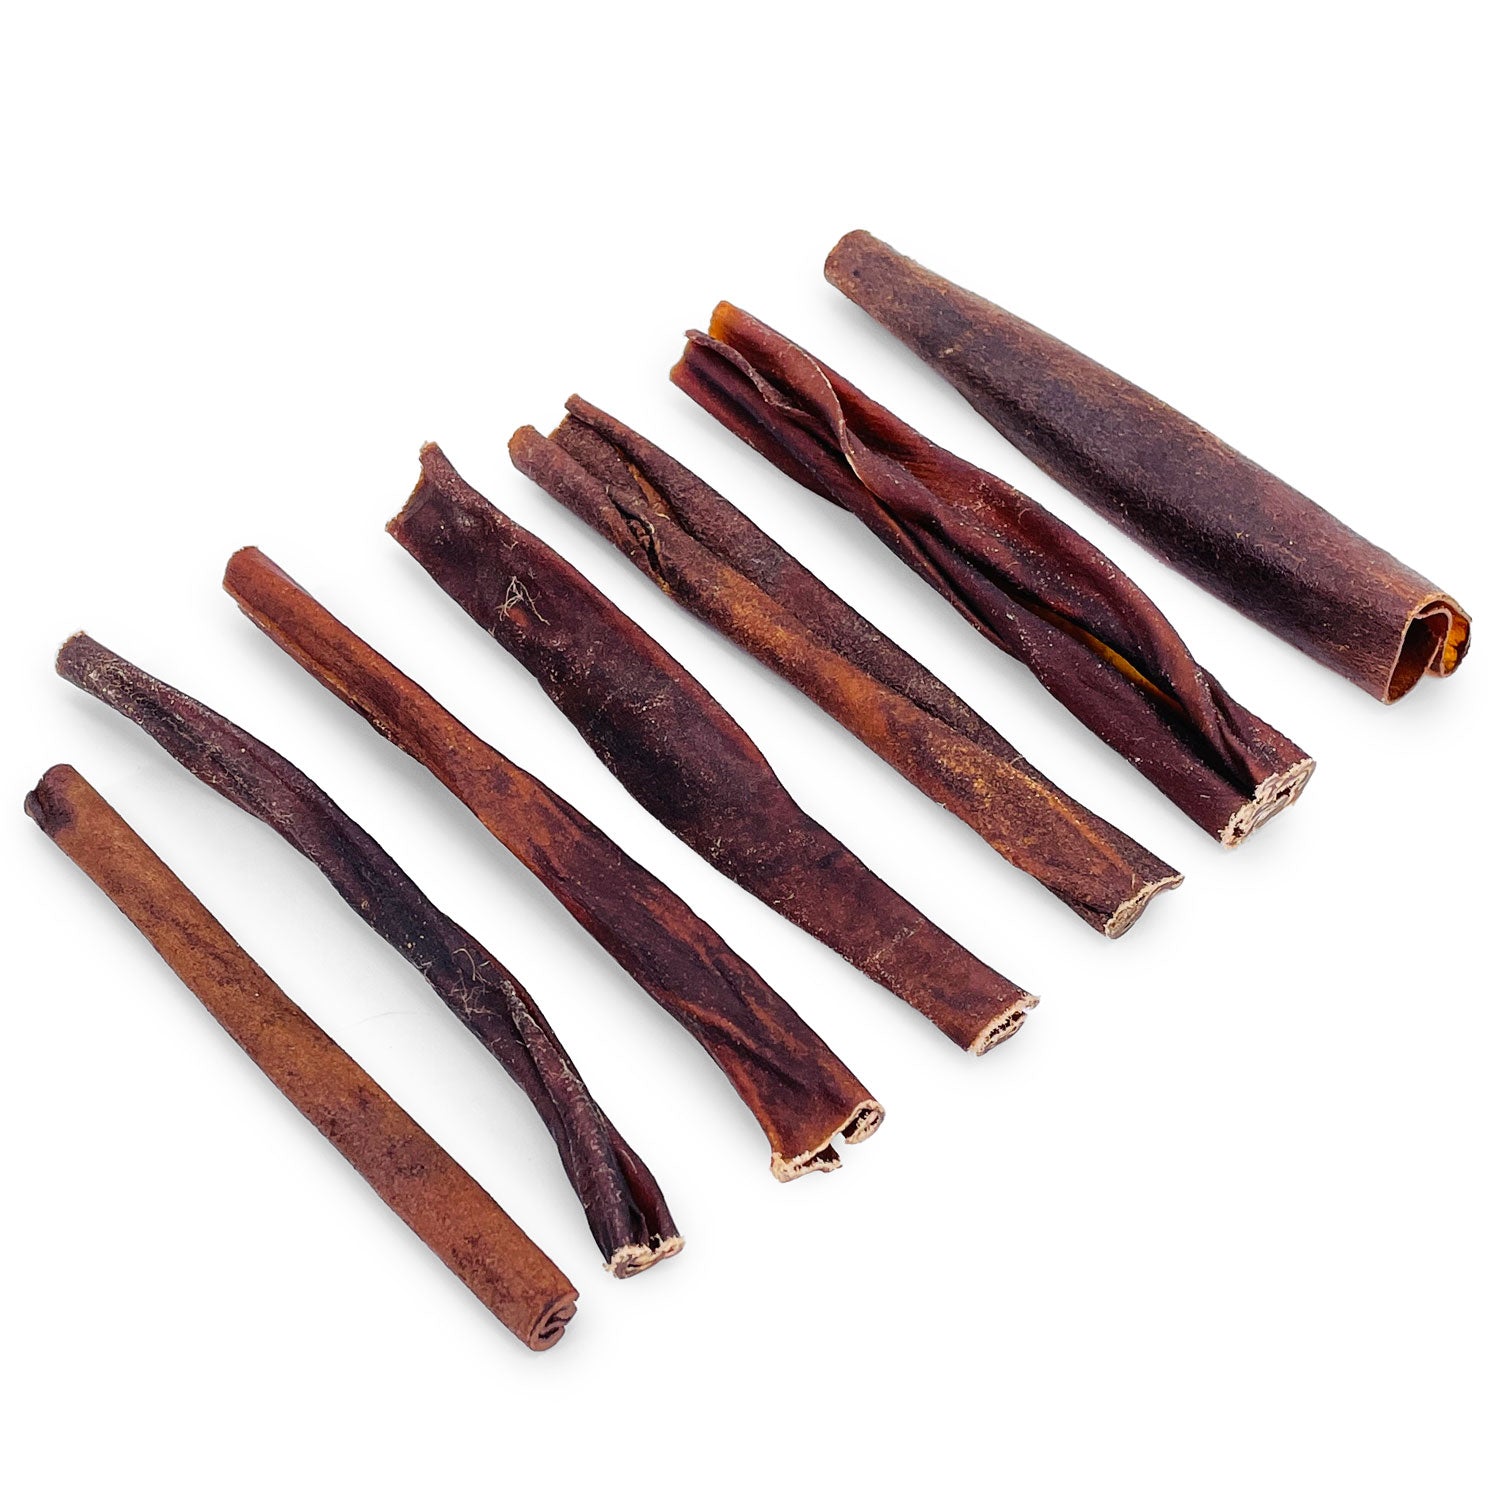 ValueBull Collagen Sticks Long Lasting Beef Dog Chews, Varied Shapes & Sizes, 40 lb. WHOLESALE PACK